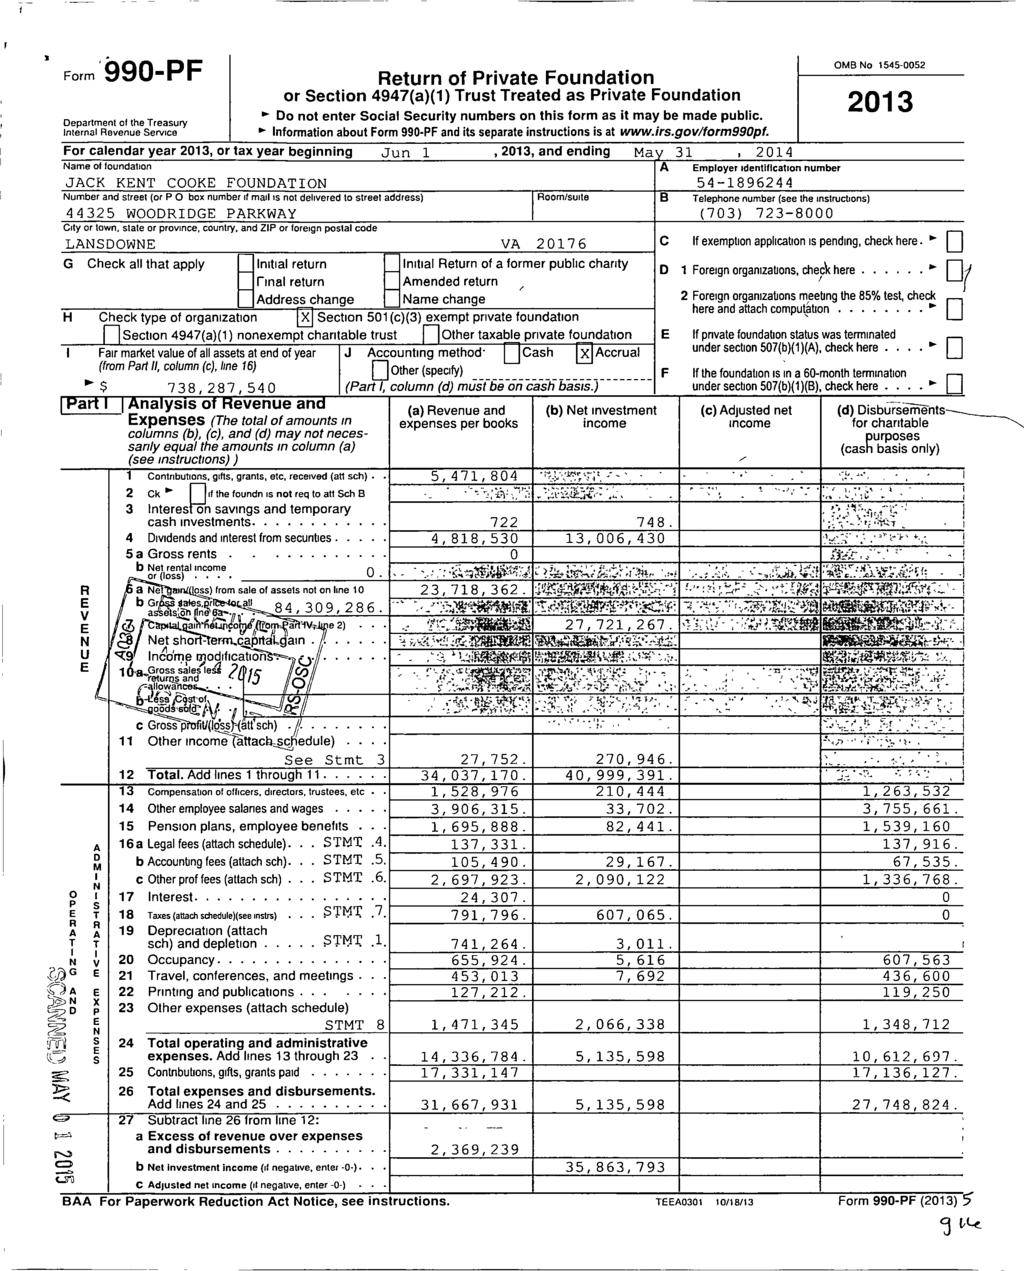 Form '990 -P F Return of Private Foundation or Section 4947(a)(1) Trust Treated as Private Foundation Department of the Treasury Do not enter Social Security numbers on this form as it may be made